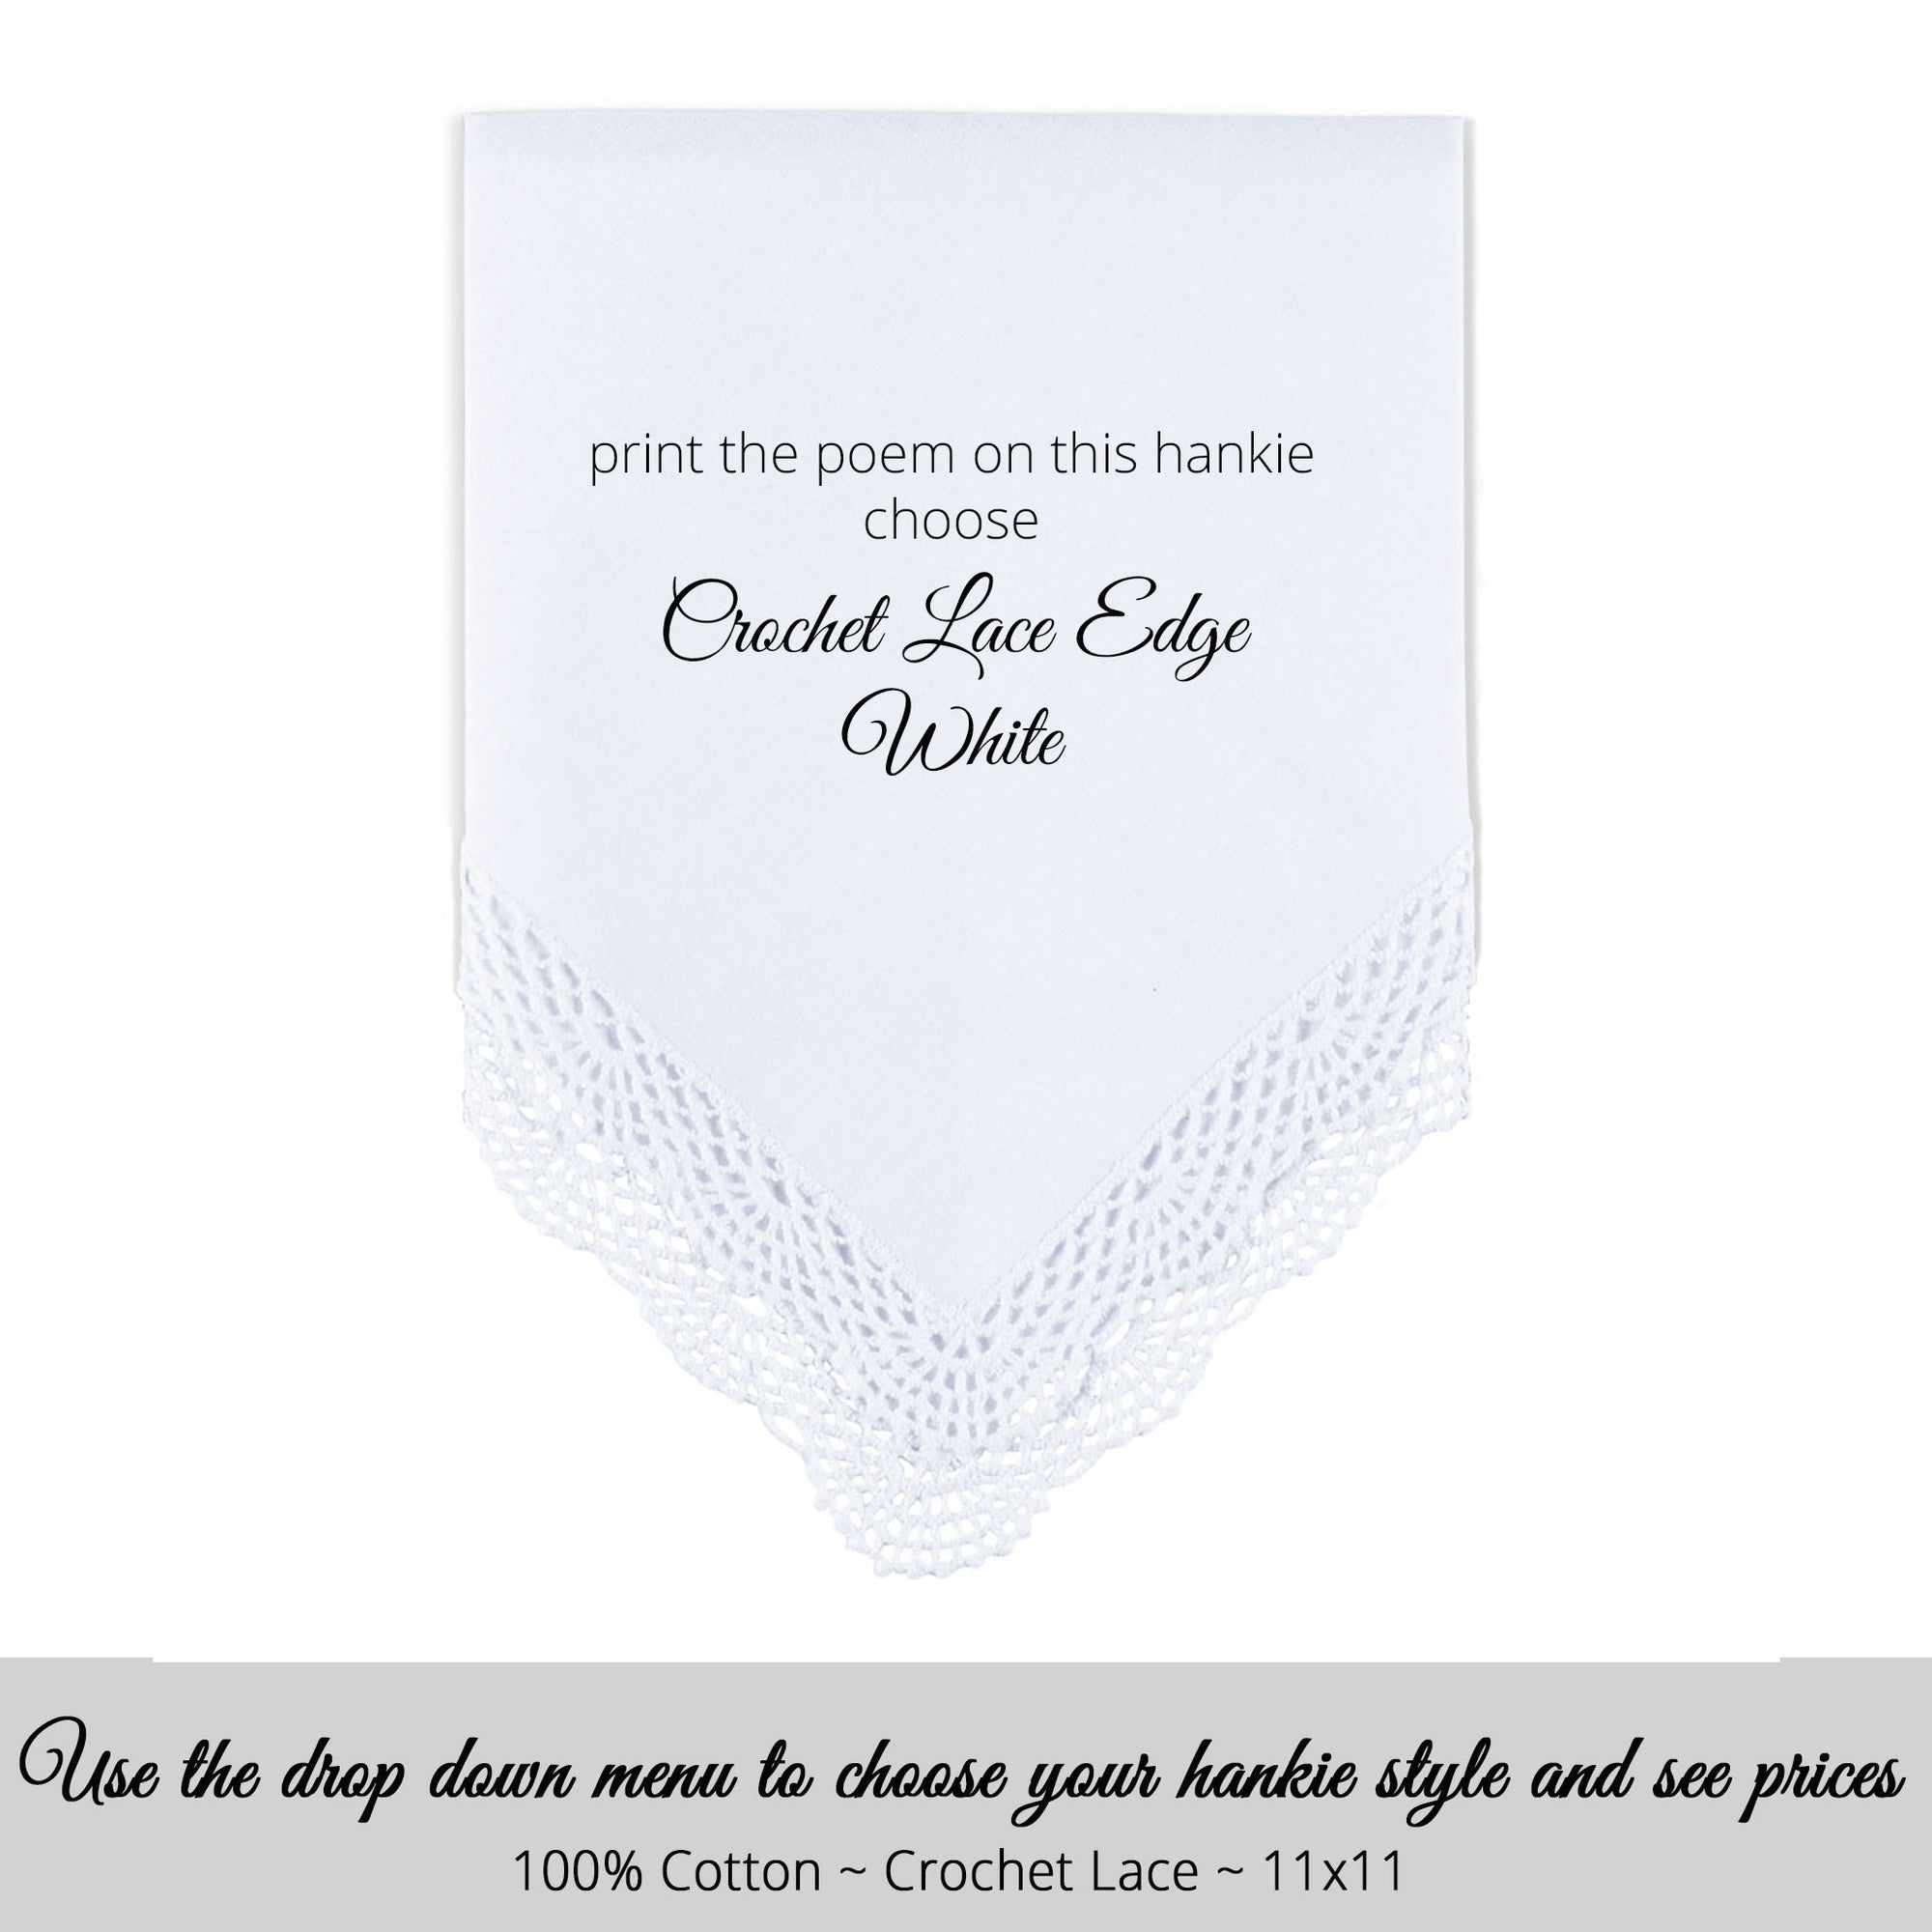 Wedding handkerchief white with crochet lace edge poem printed hankie for the stepdaughter of the bride